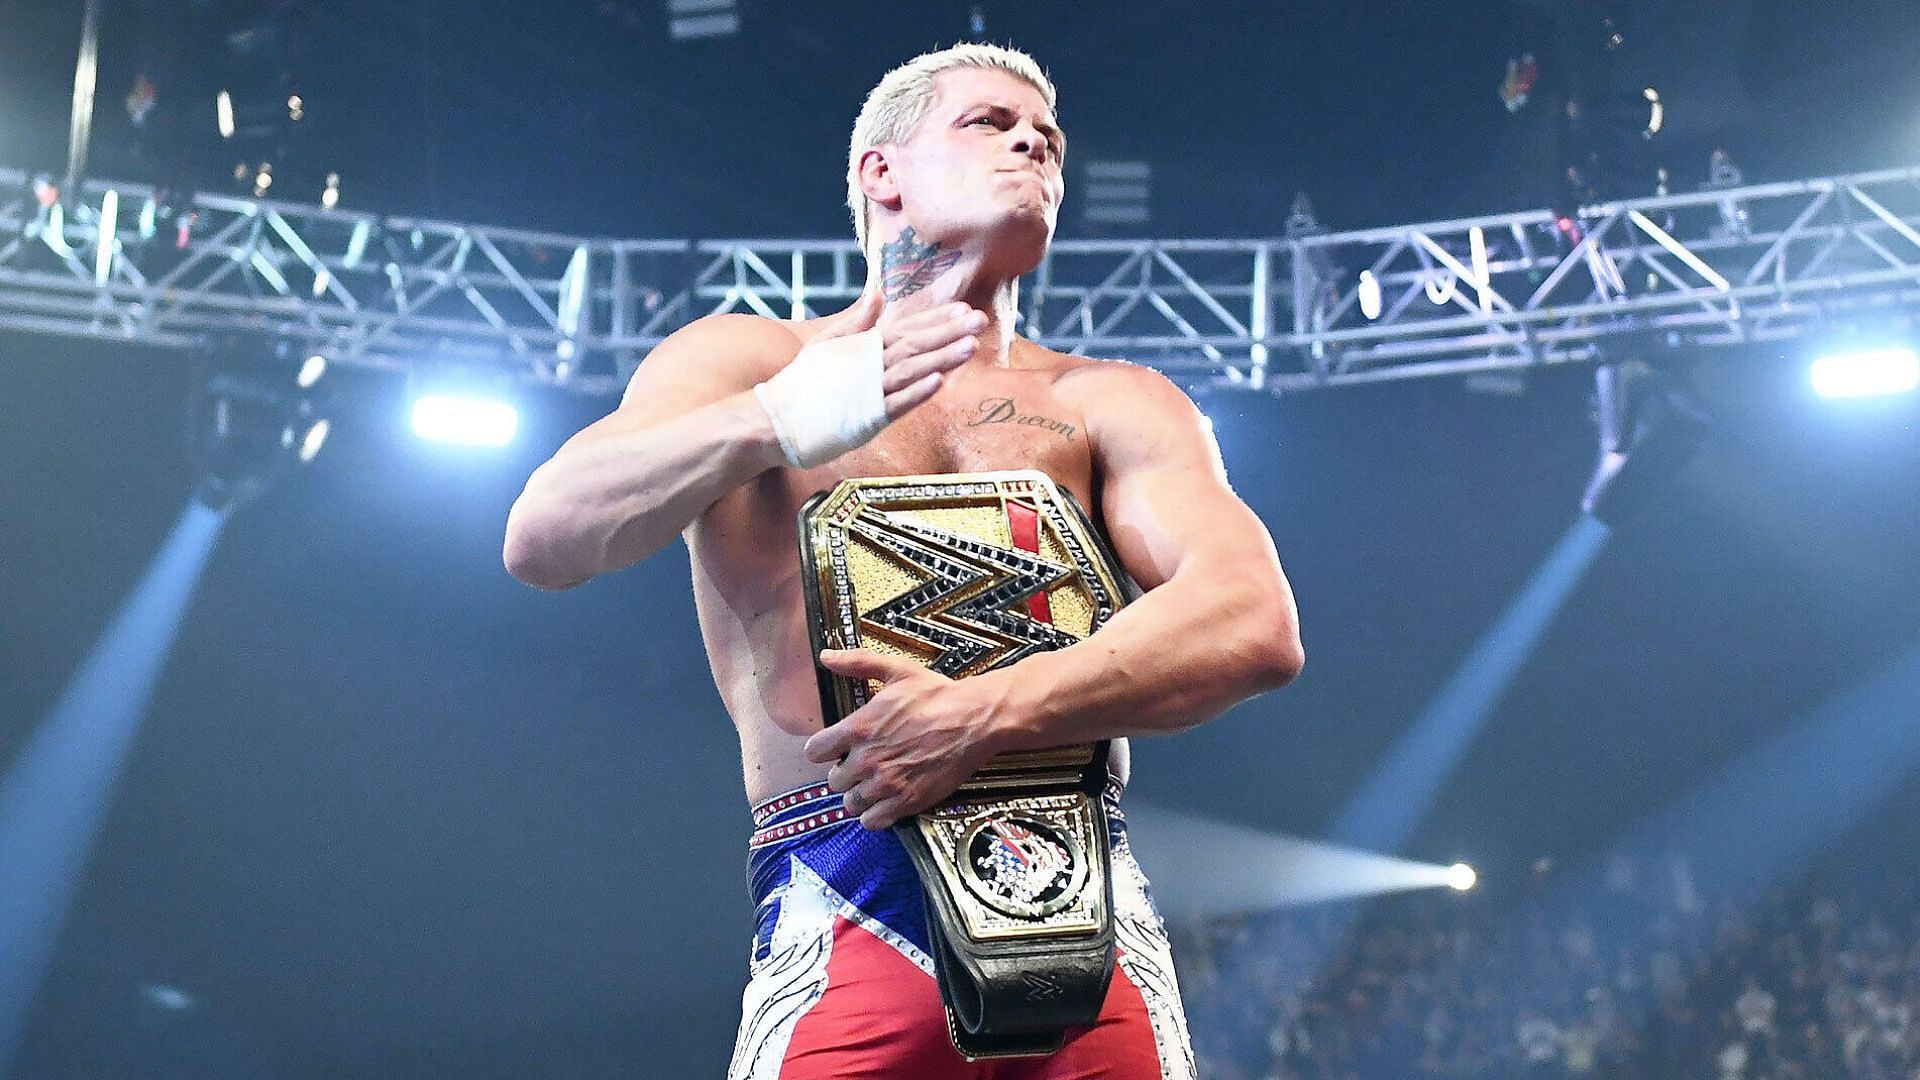 Cody Rhodes crossed a month as Undisputed WWE Champion!